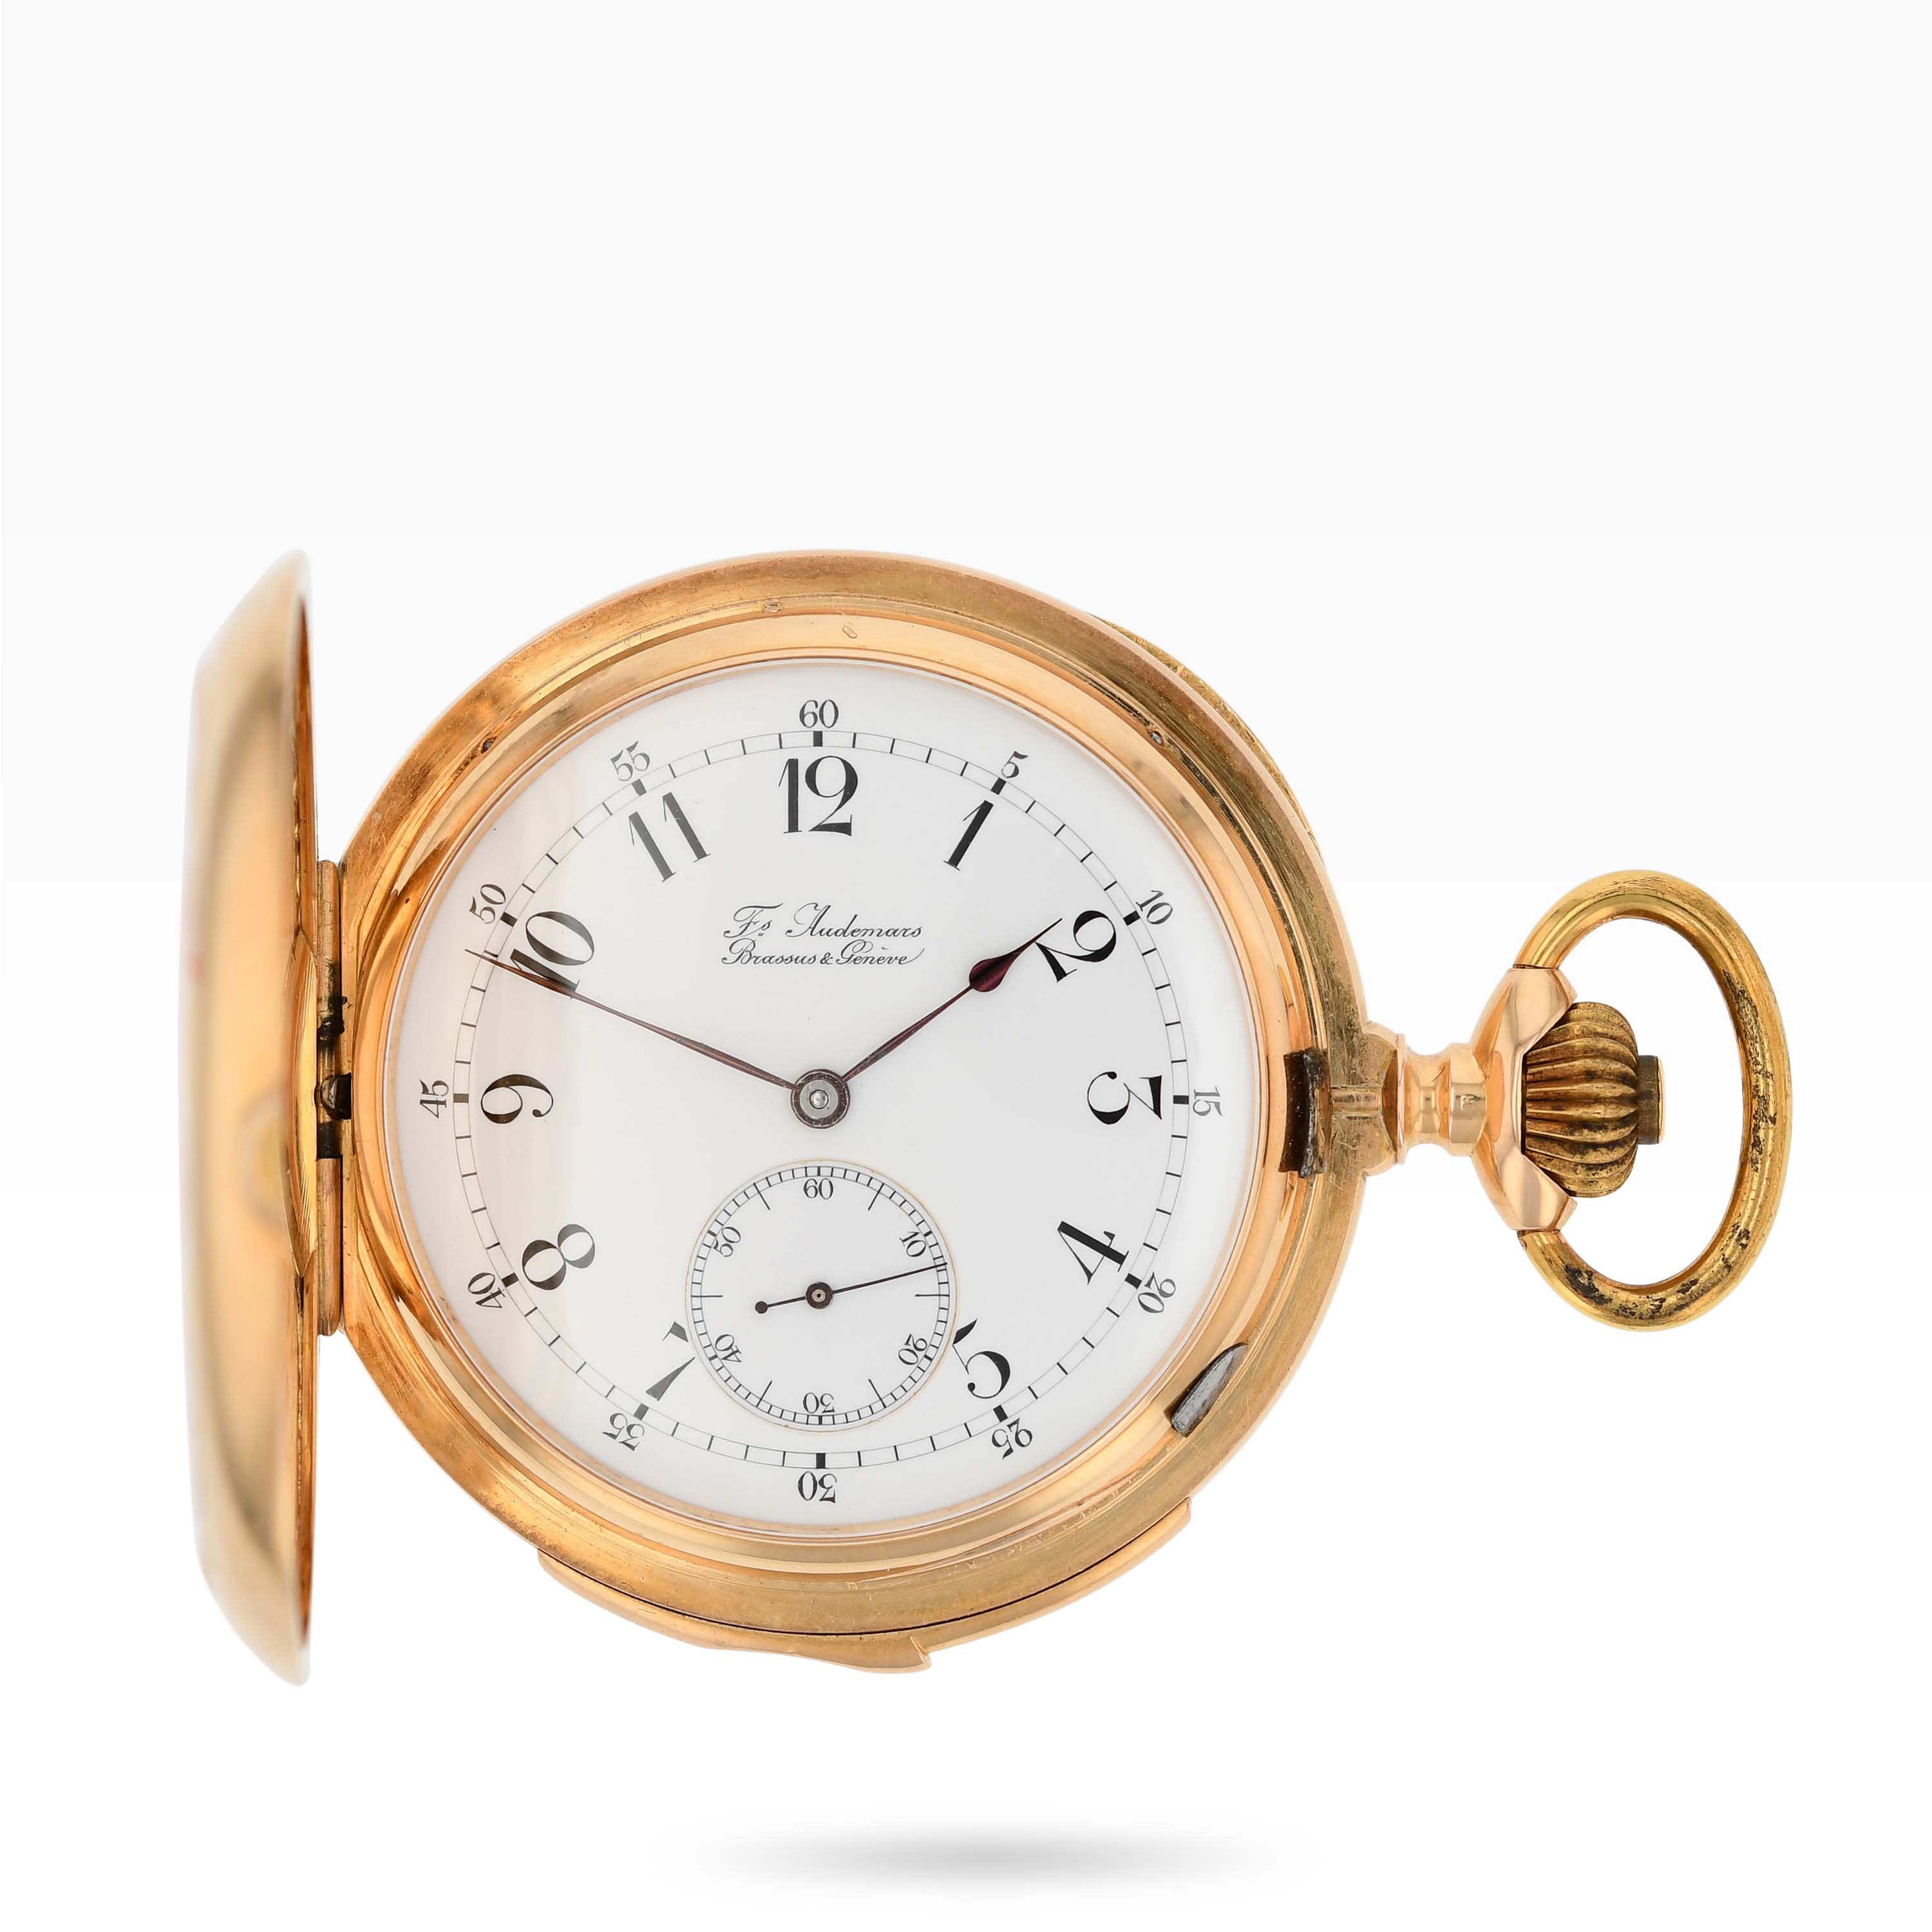 1278PW1 Frères Audemars 18k yellow gold hunting case minute repeater pocket watch img-main1